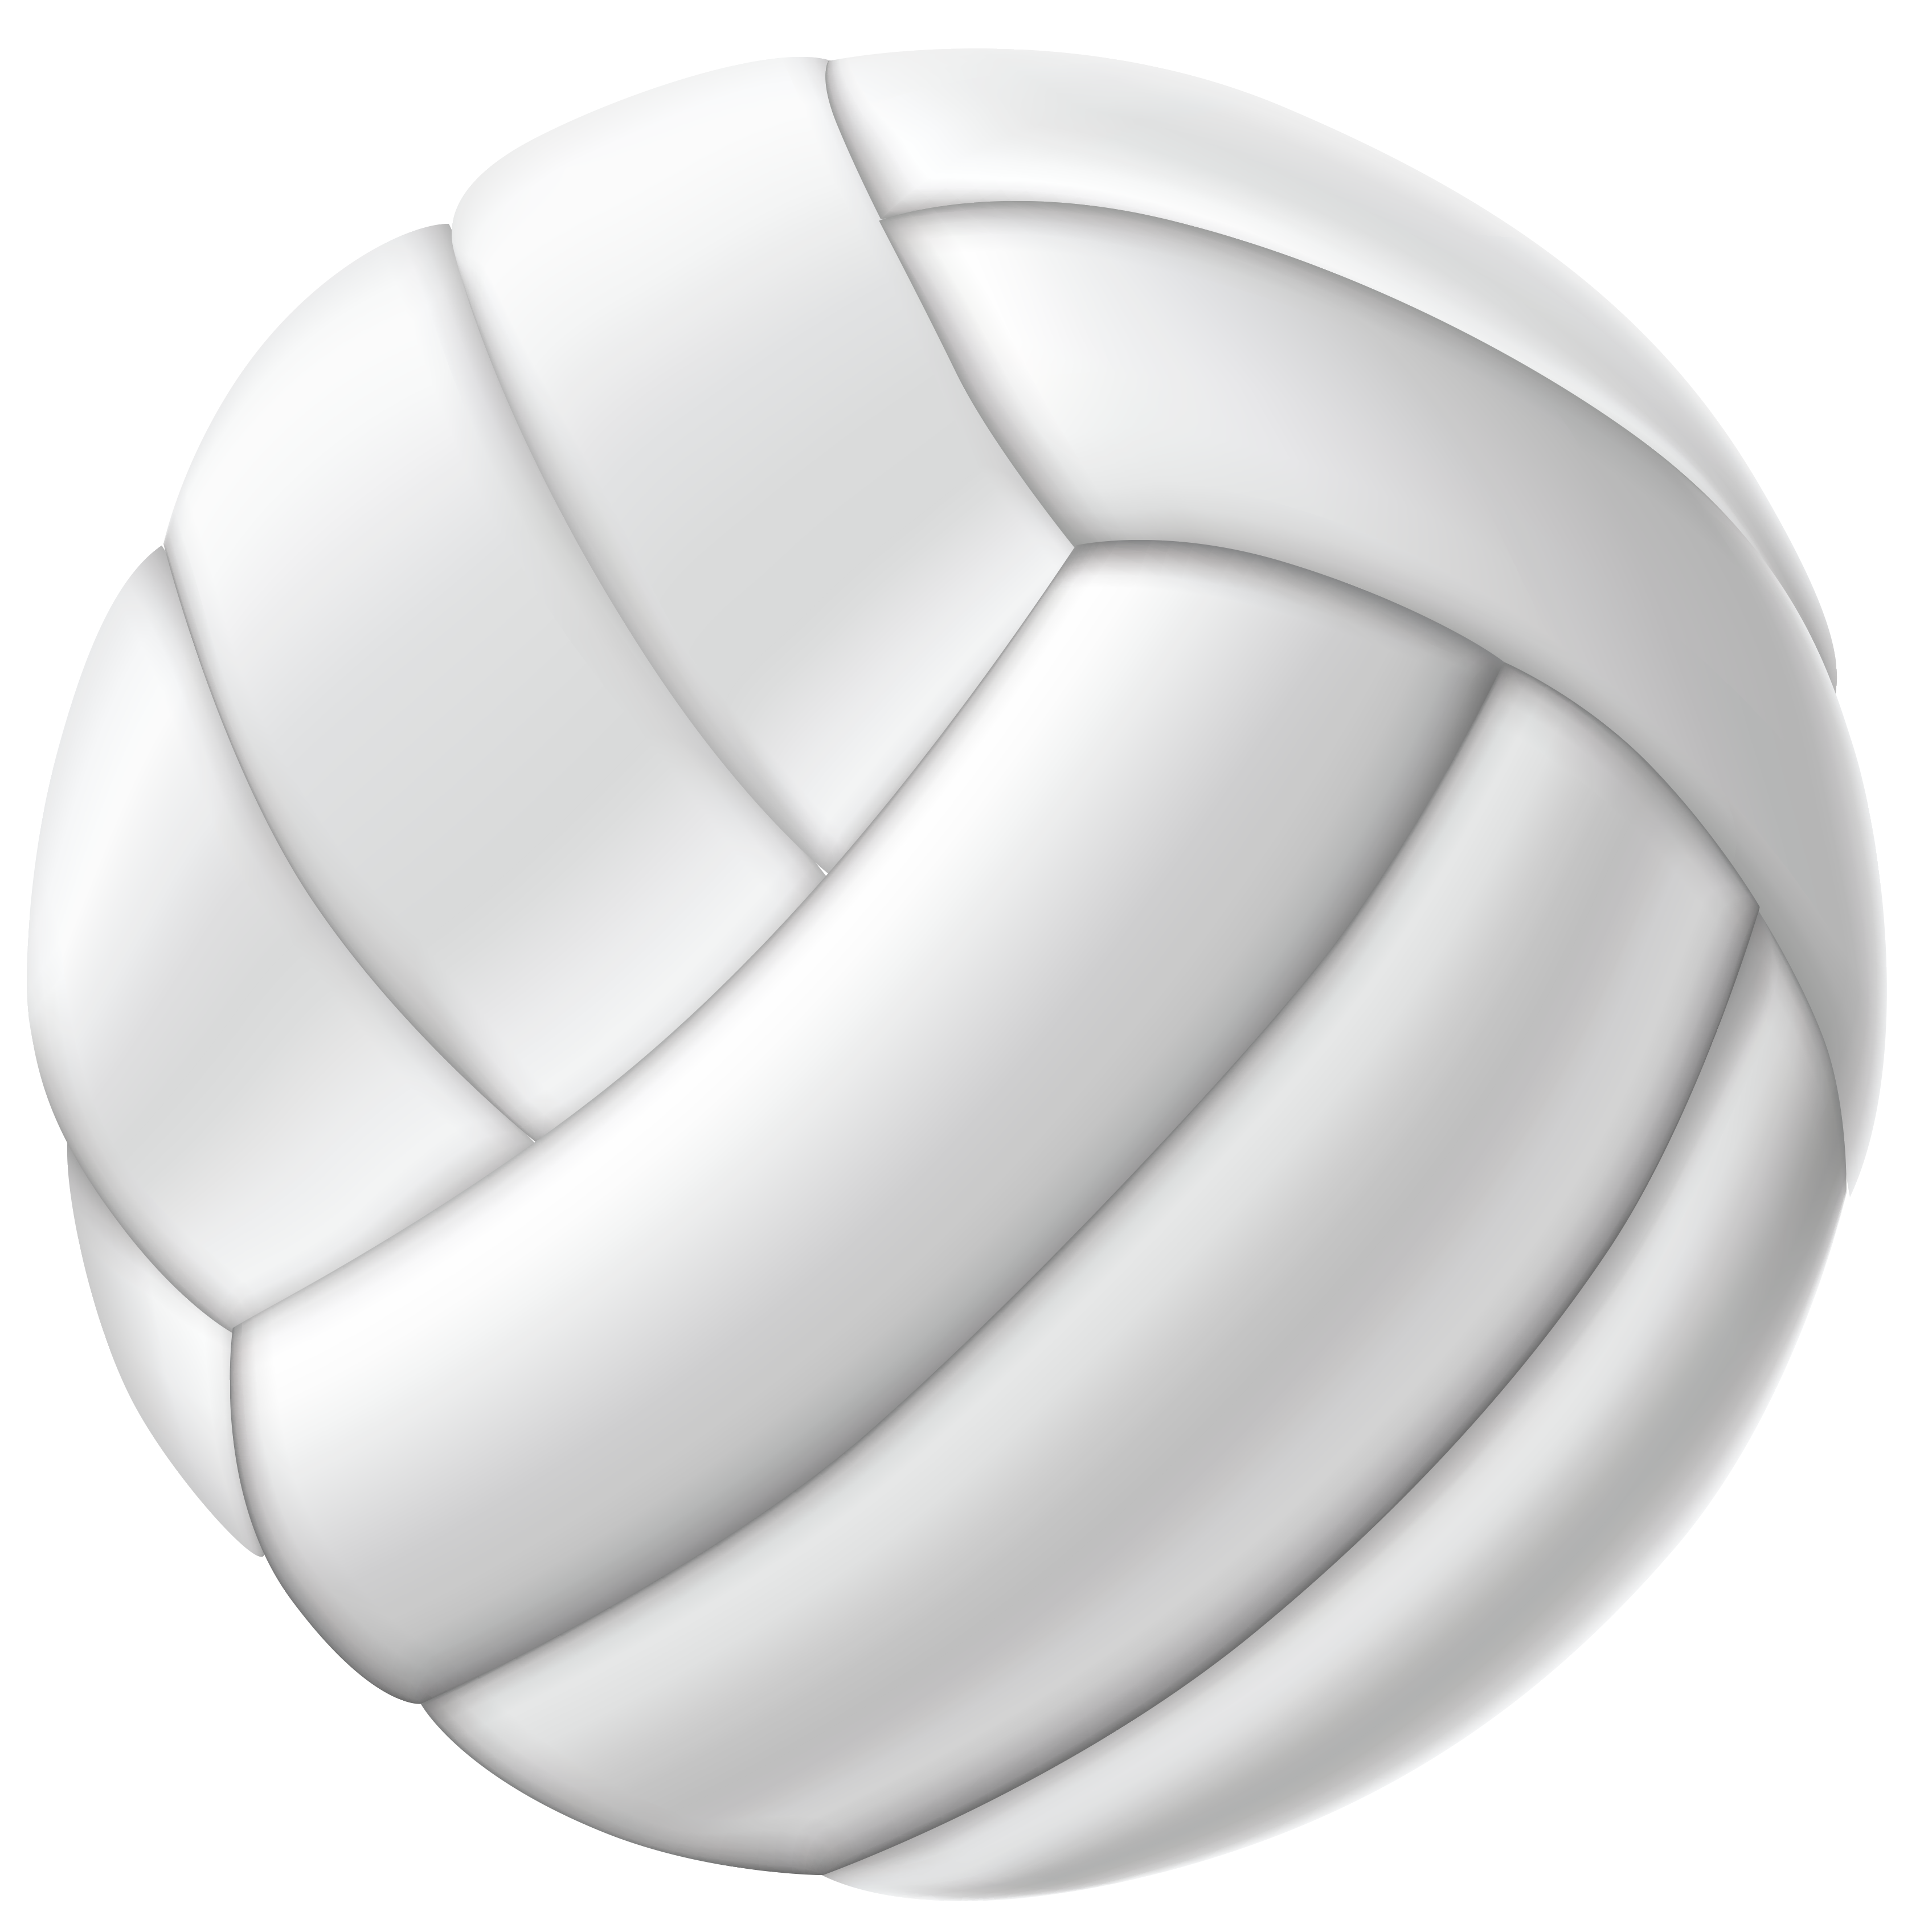 Volley-ball